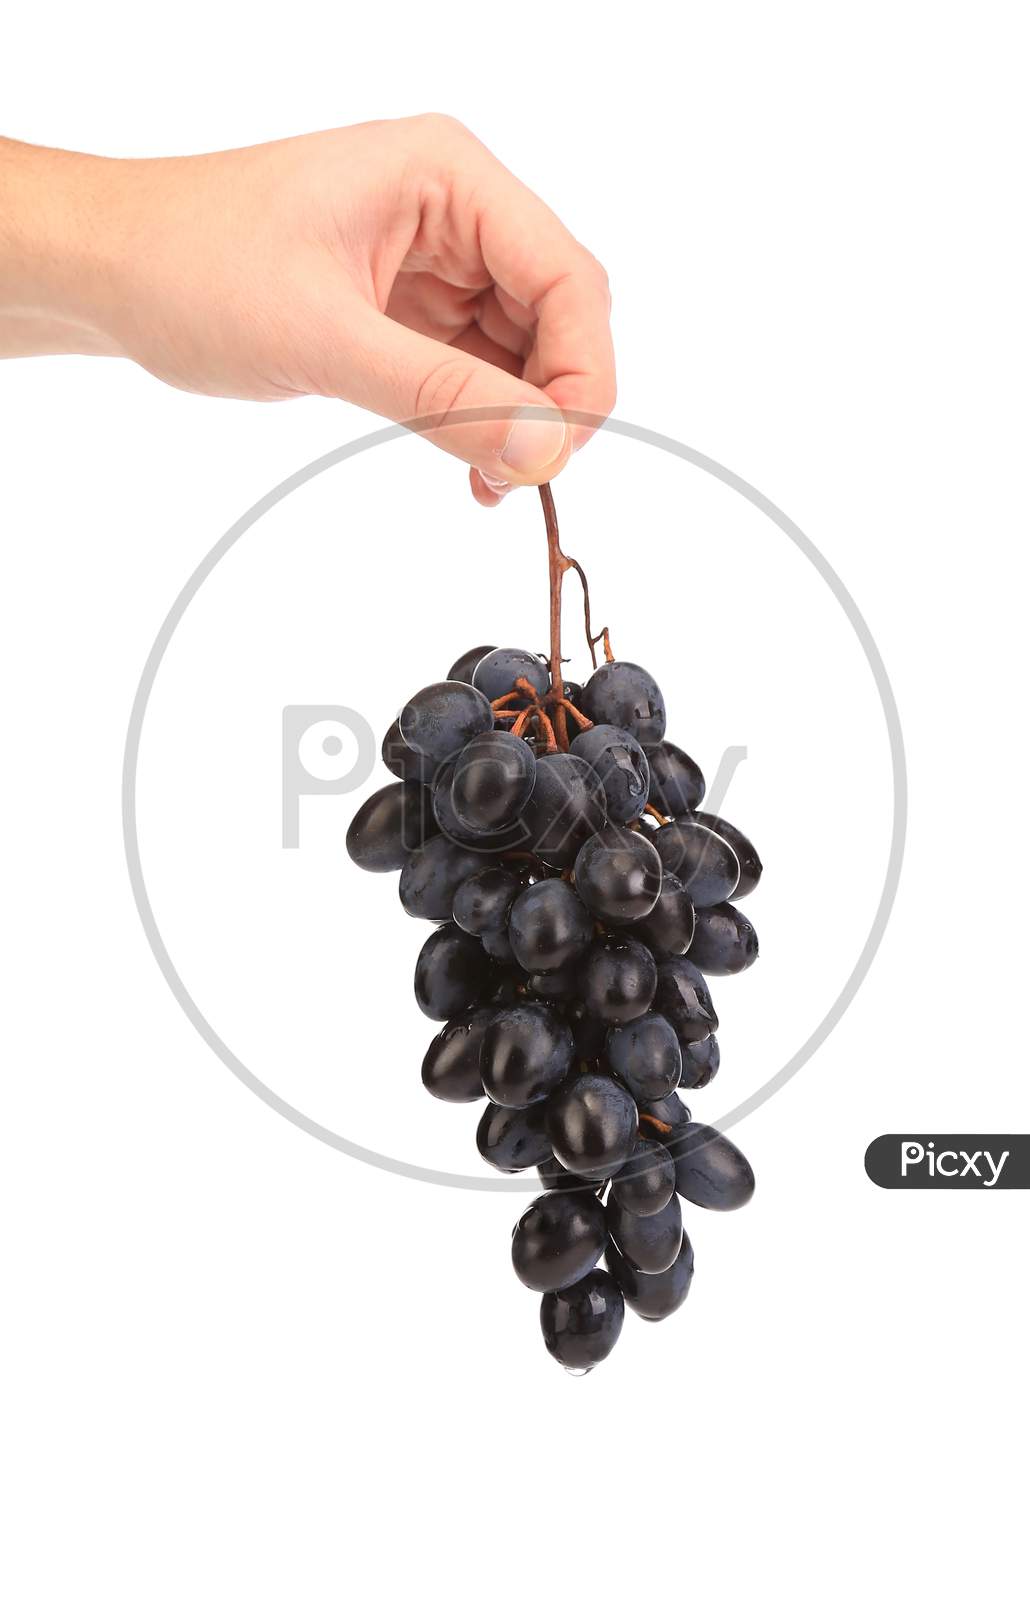 Branch Of Black Ripe Grapes In Hand. Isolated On A White Background.